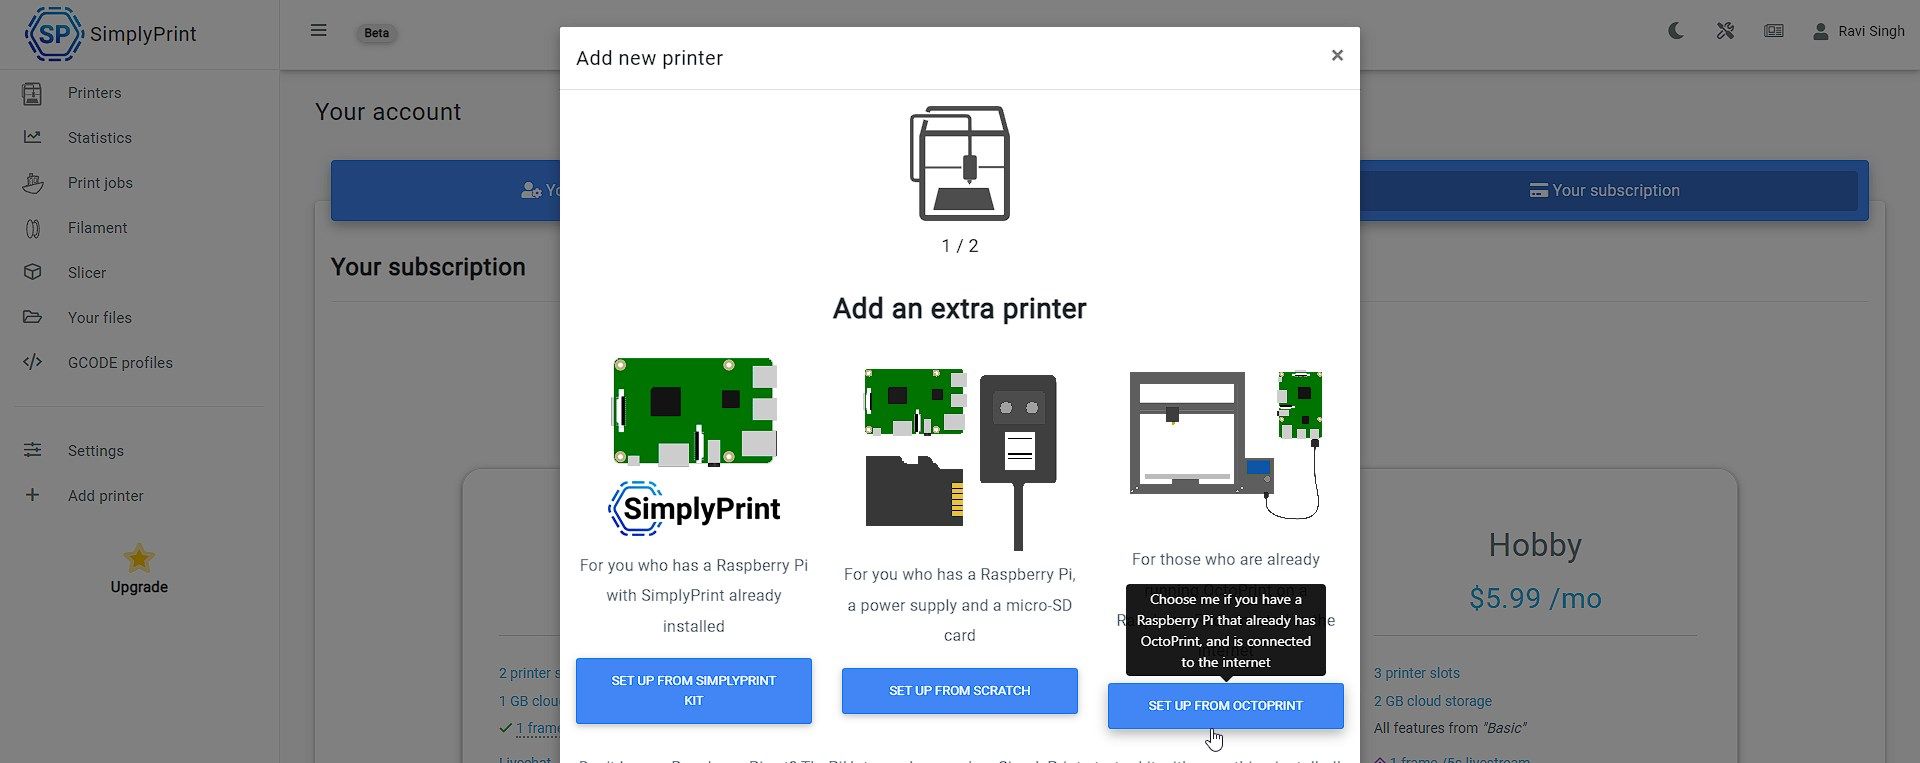 add printer using octoprint option in simplyprint